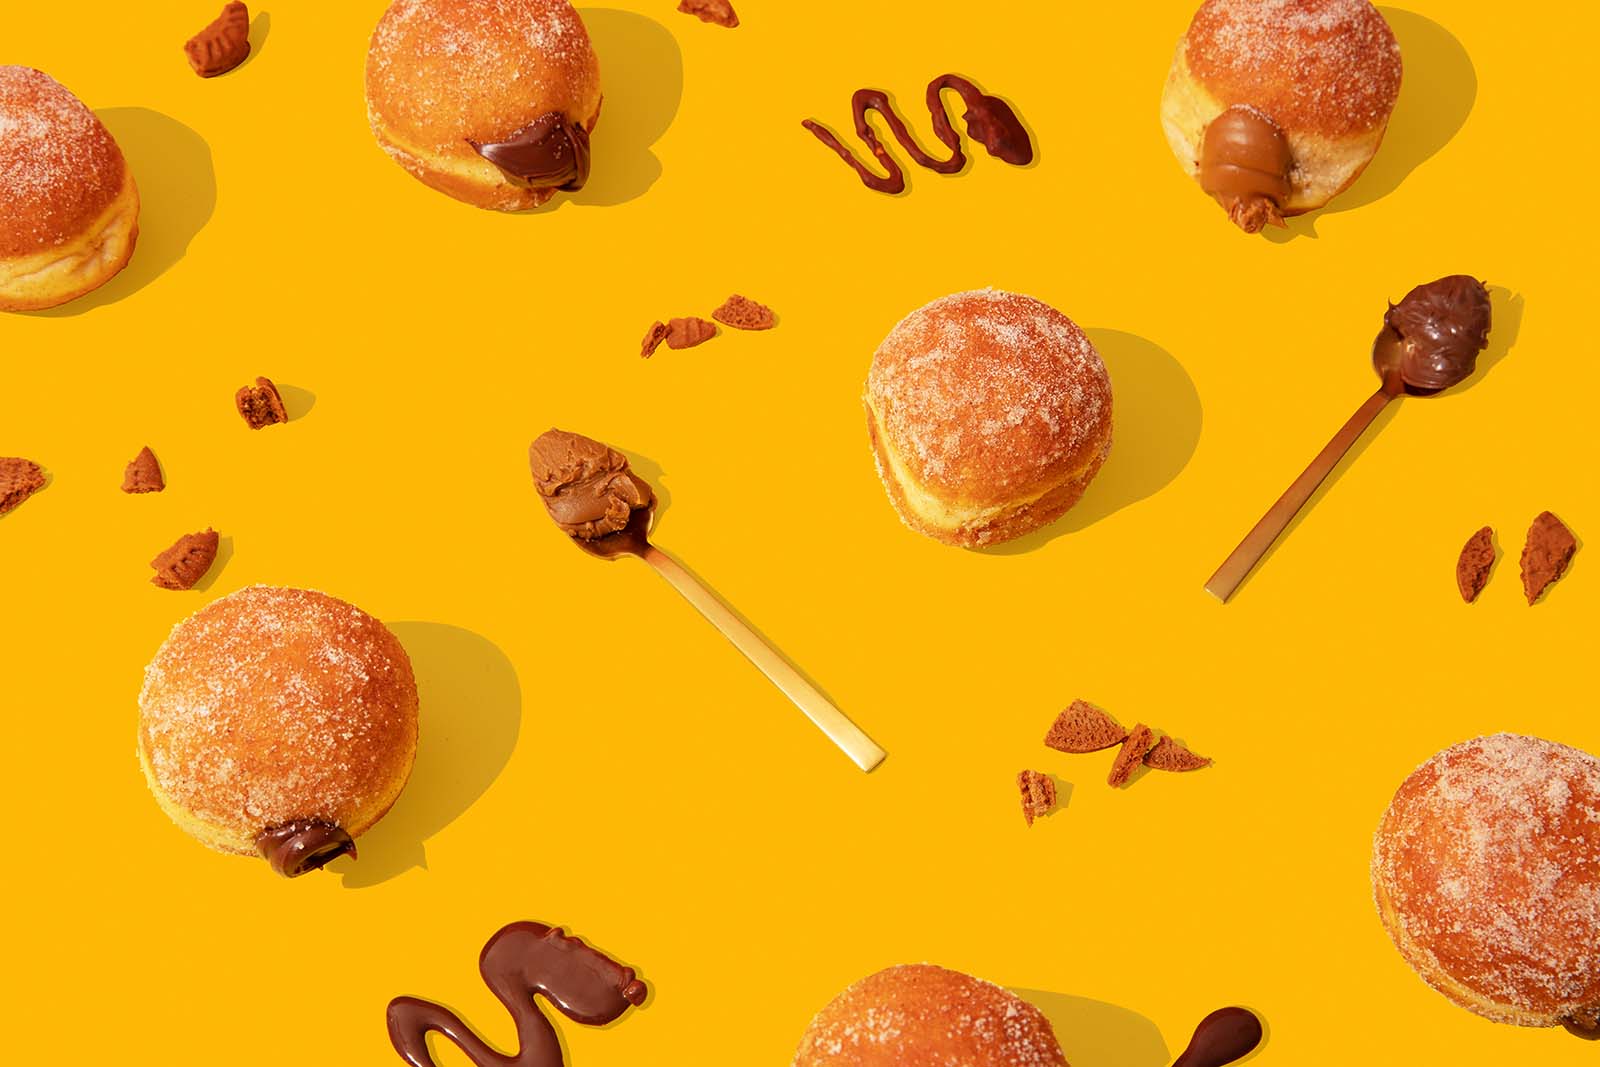 creative food photography of donuts. Styled donut photo by colourpop studio